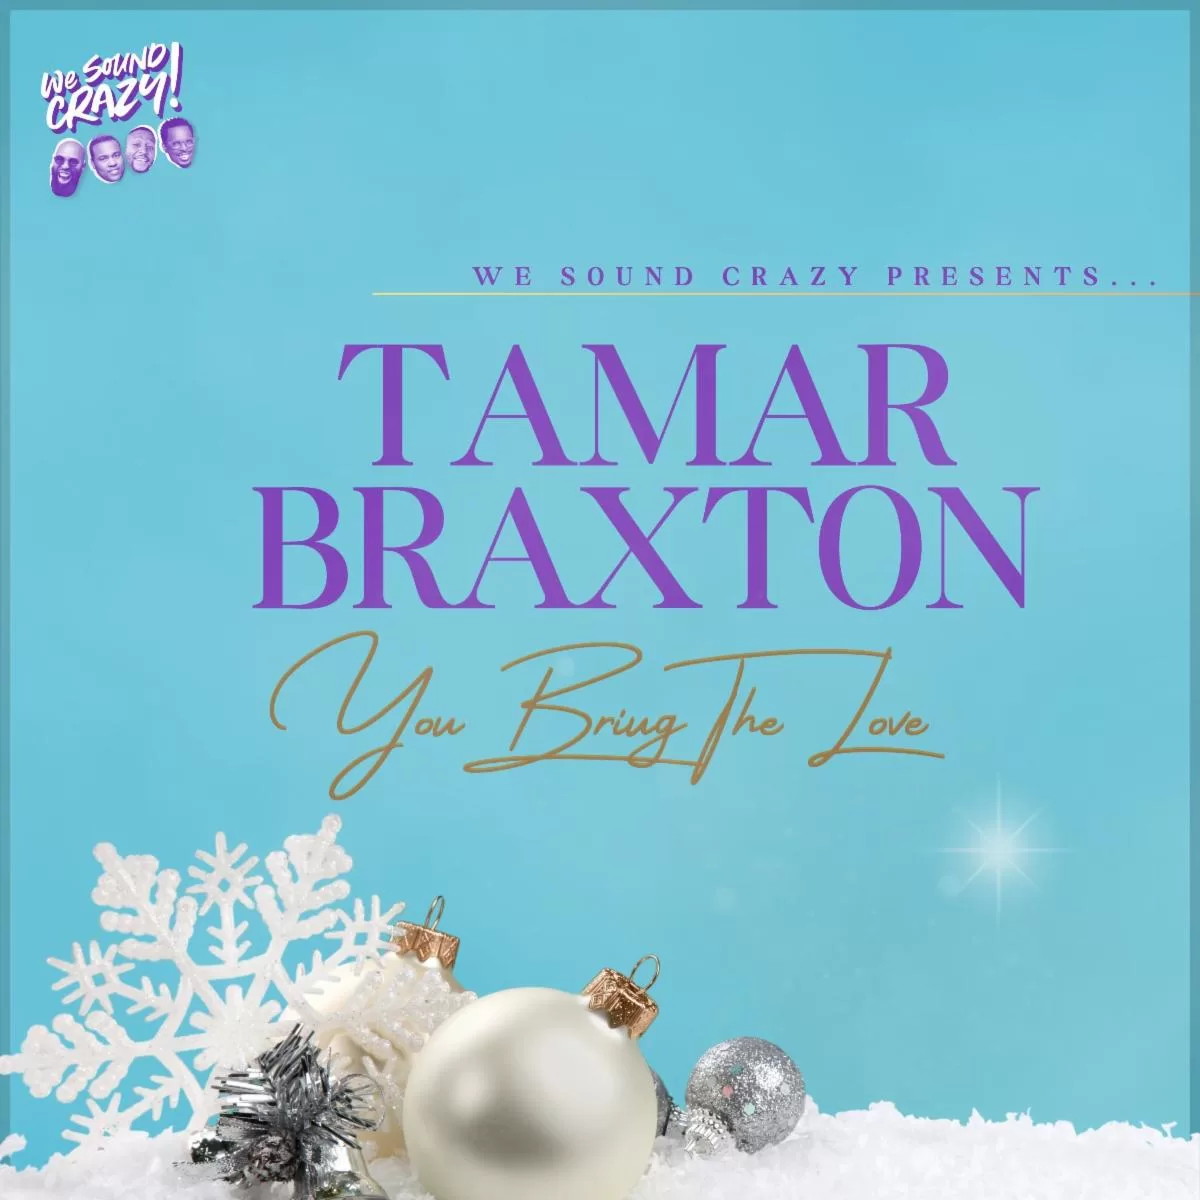 Tamar Braxton Teams Up With Louis York & We Sound Crazy Podcast To Release New Single “You Bring the Love” #TamarBraxton